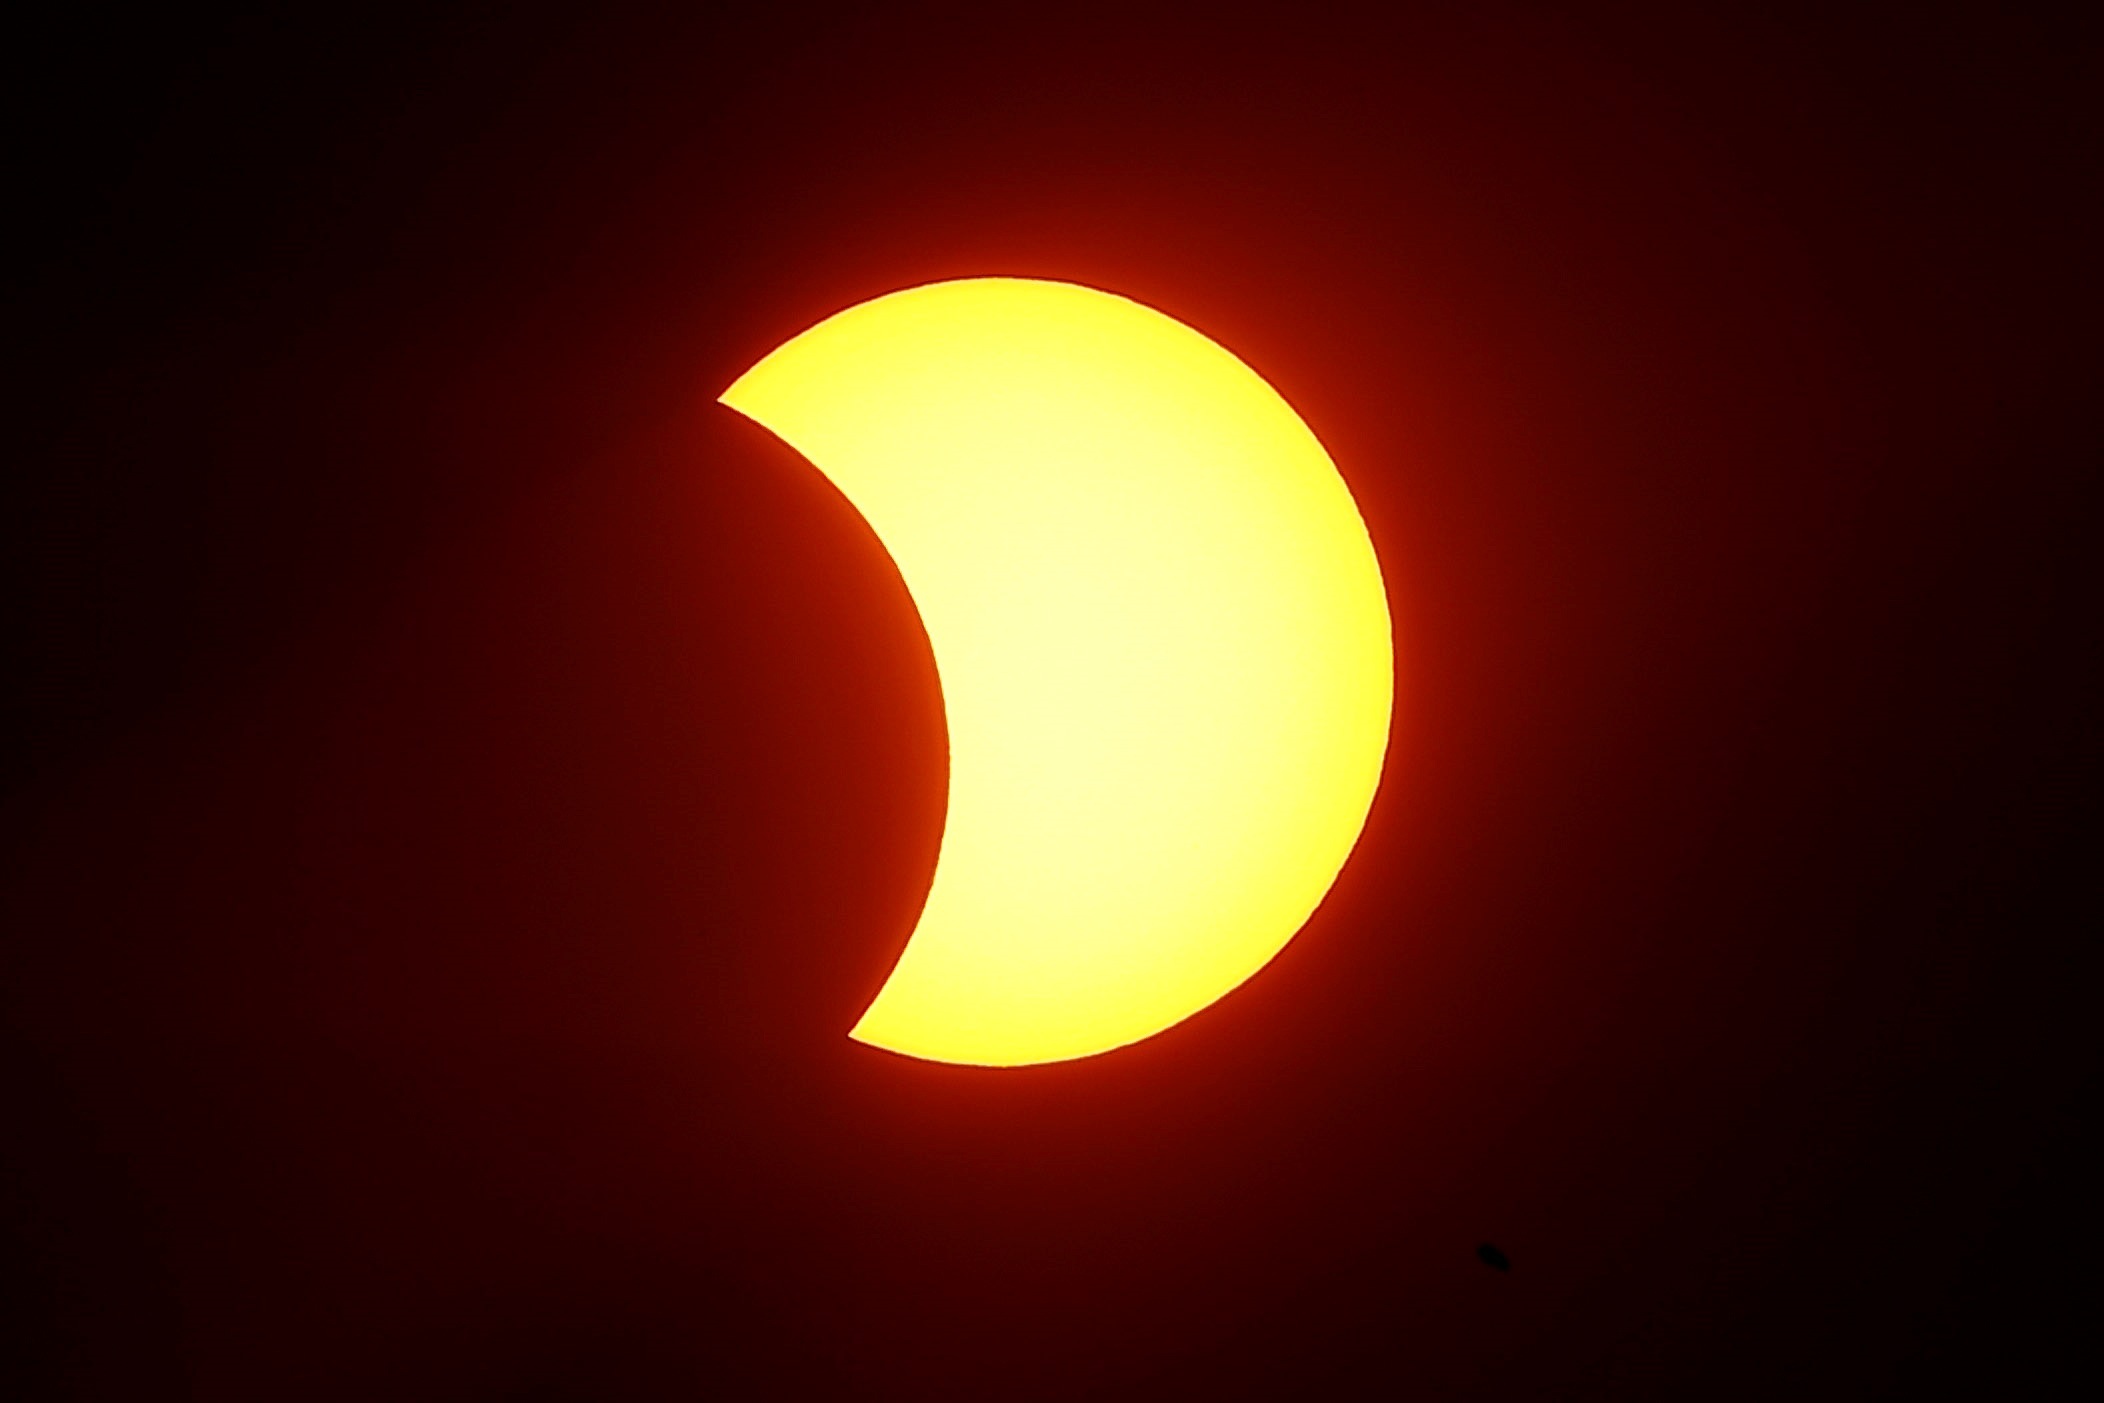 A partial solar eclipse occurs when the Moon is between the Sun and the Earth without covering the entire surface of the terrestrial plane (EFE/Sebastiao Moreira/)